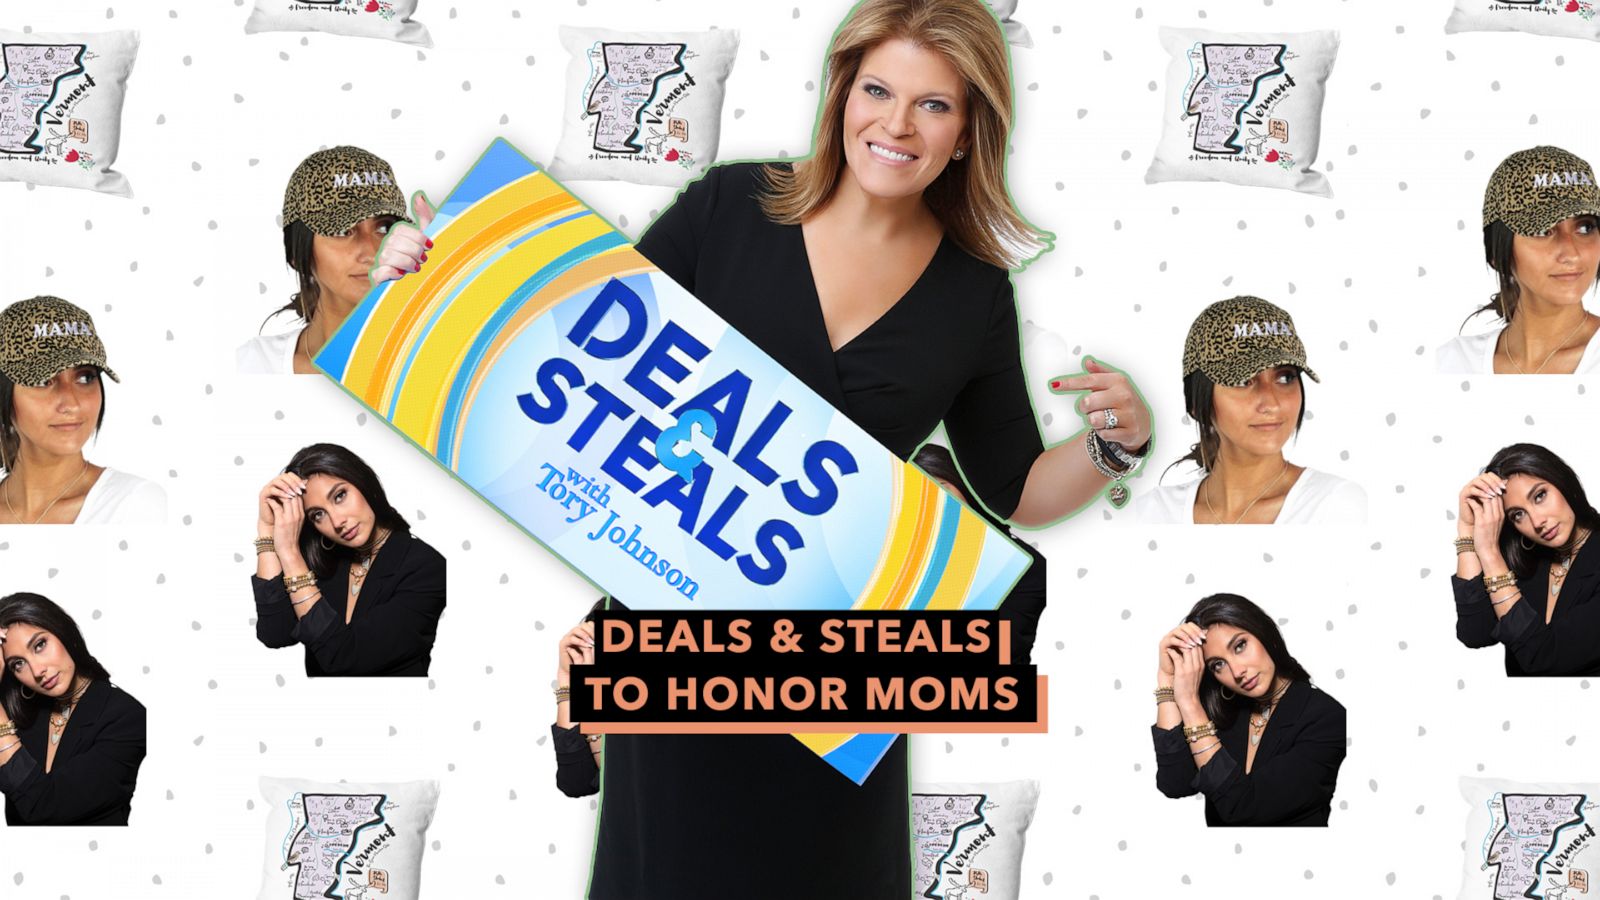 GMA' Deals & Steals to honor moms - Good Morning America